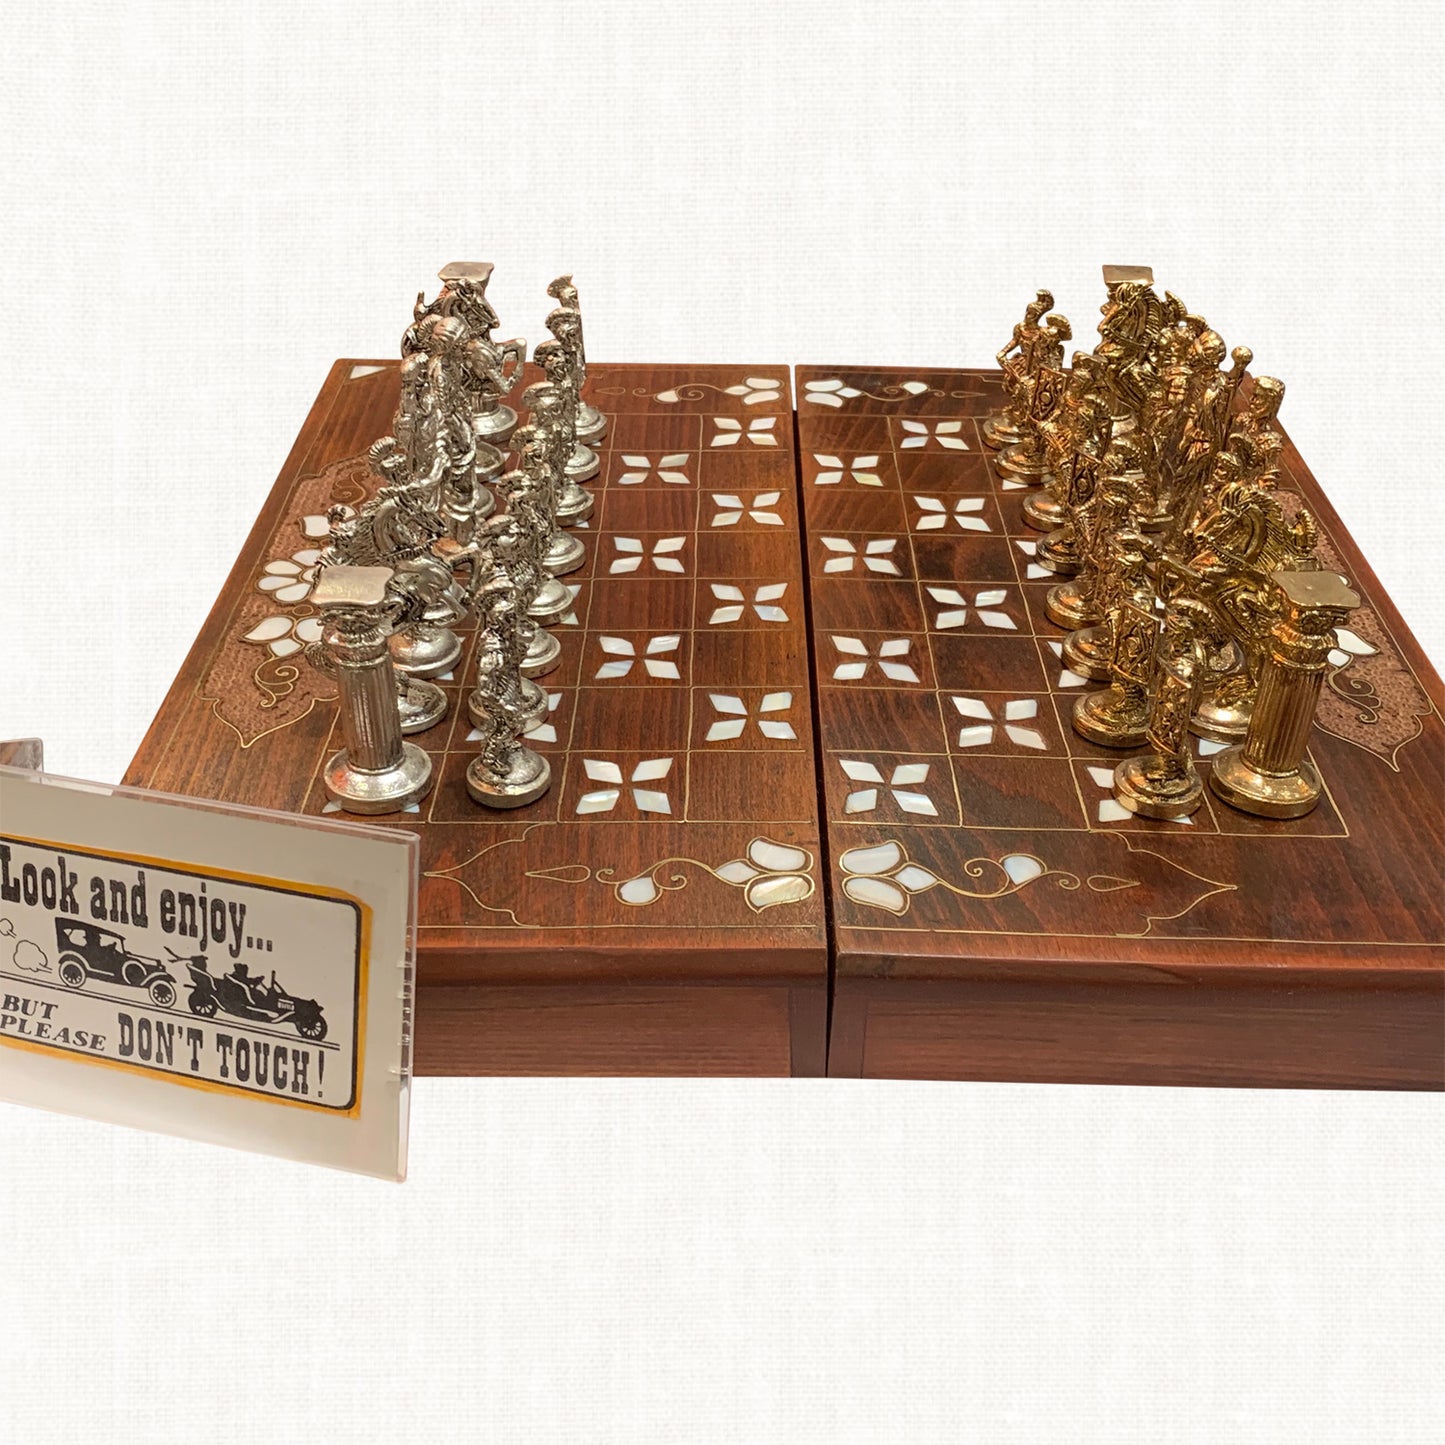 Gold Knights VS Silver Knights Chess